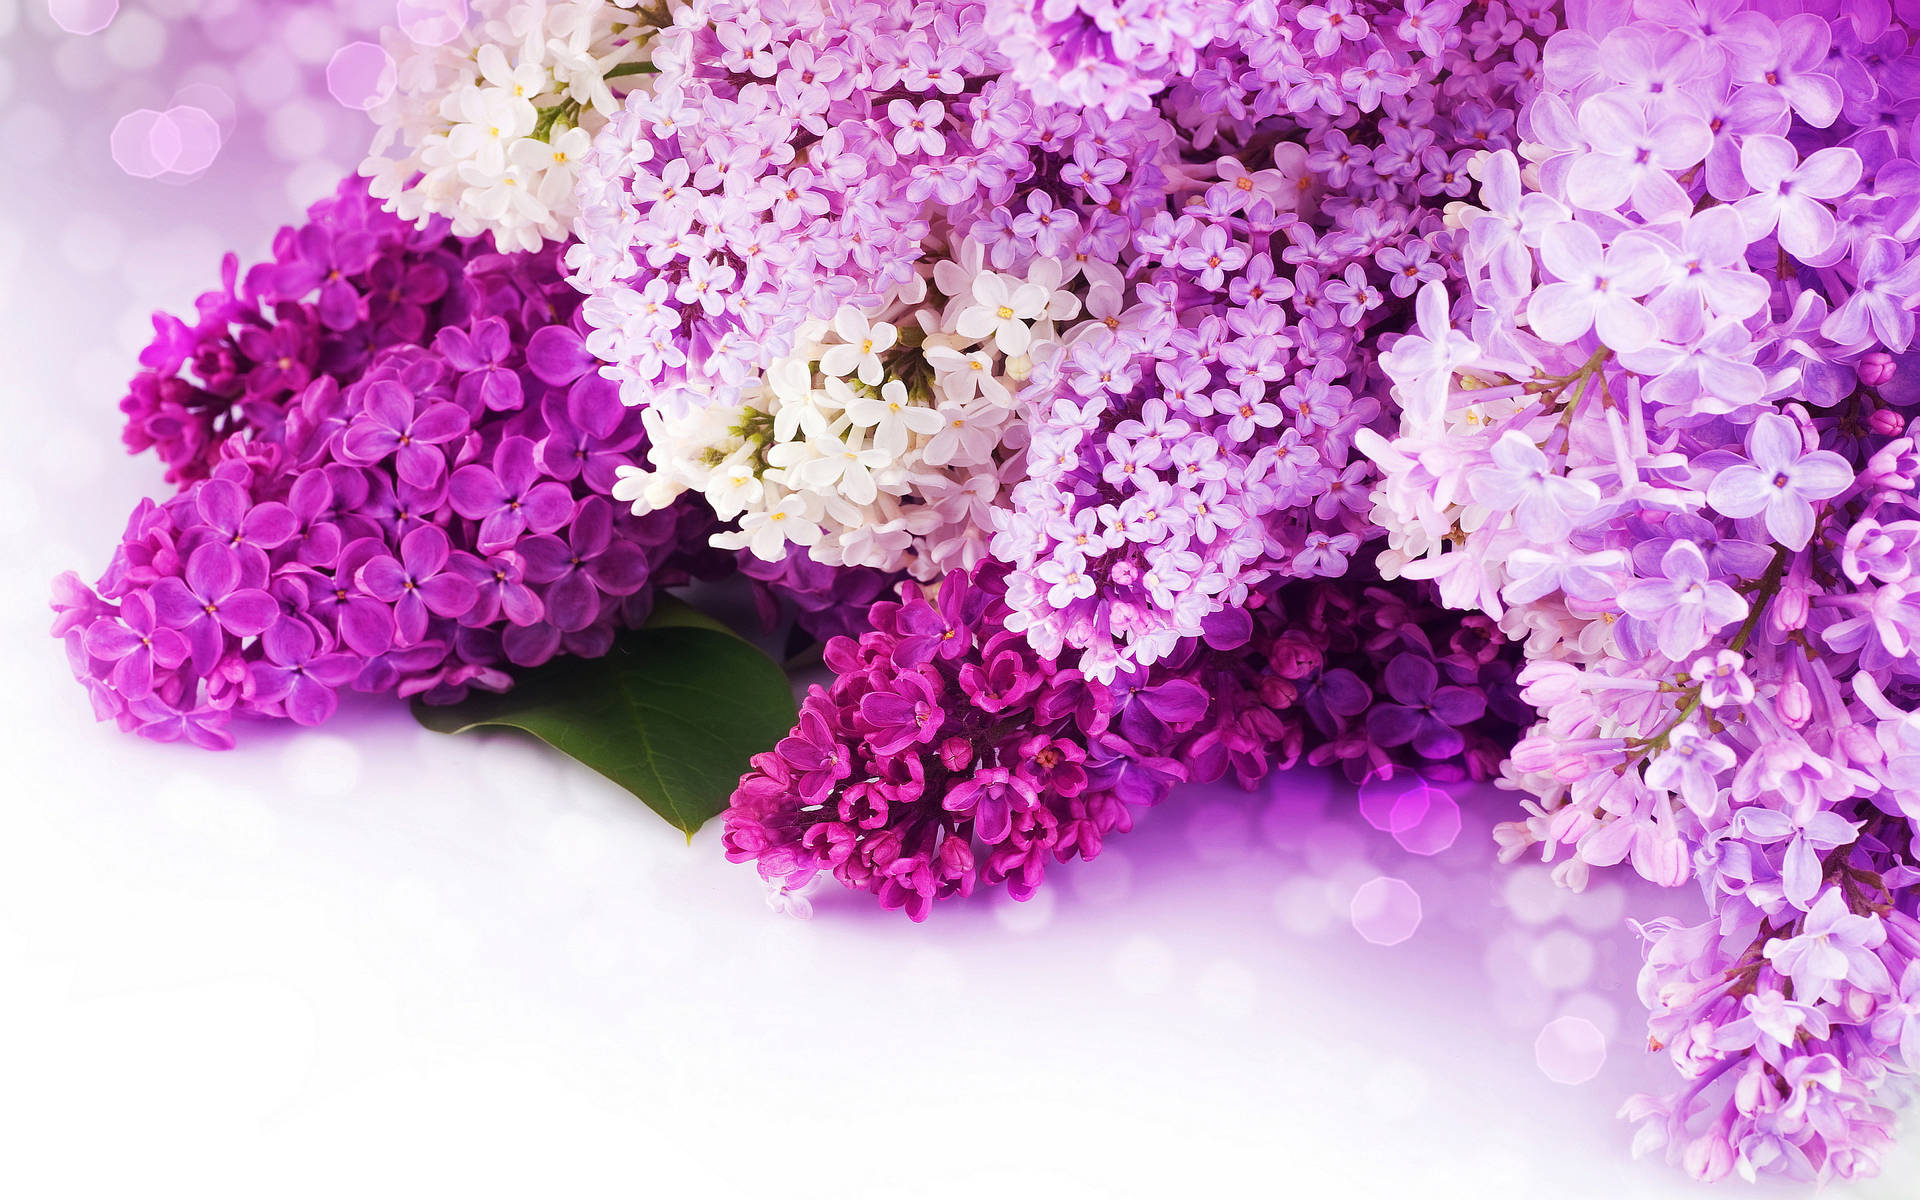 Lilas On A White Background With Purple And White Flowers Wallpaper